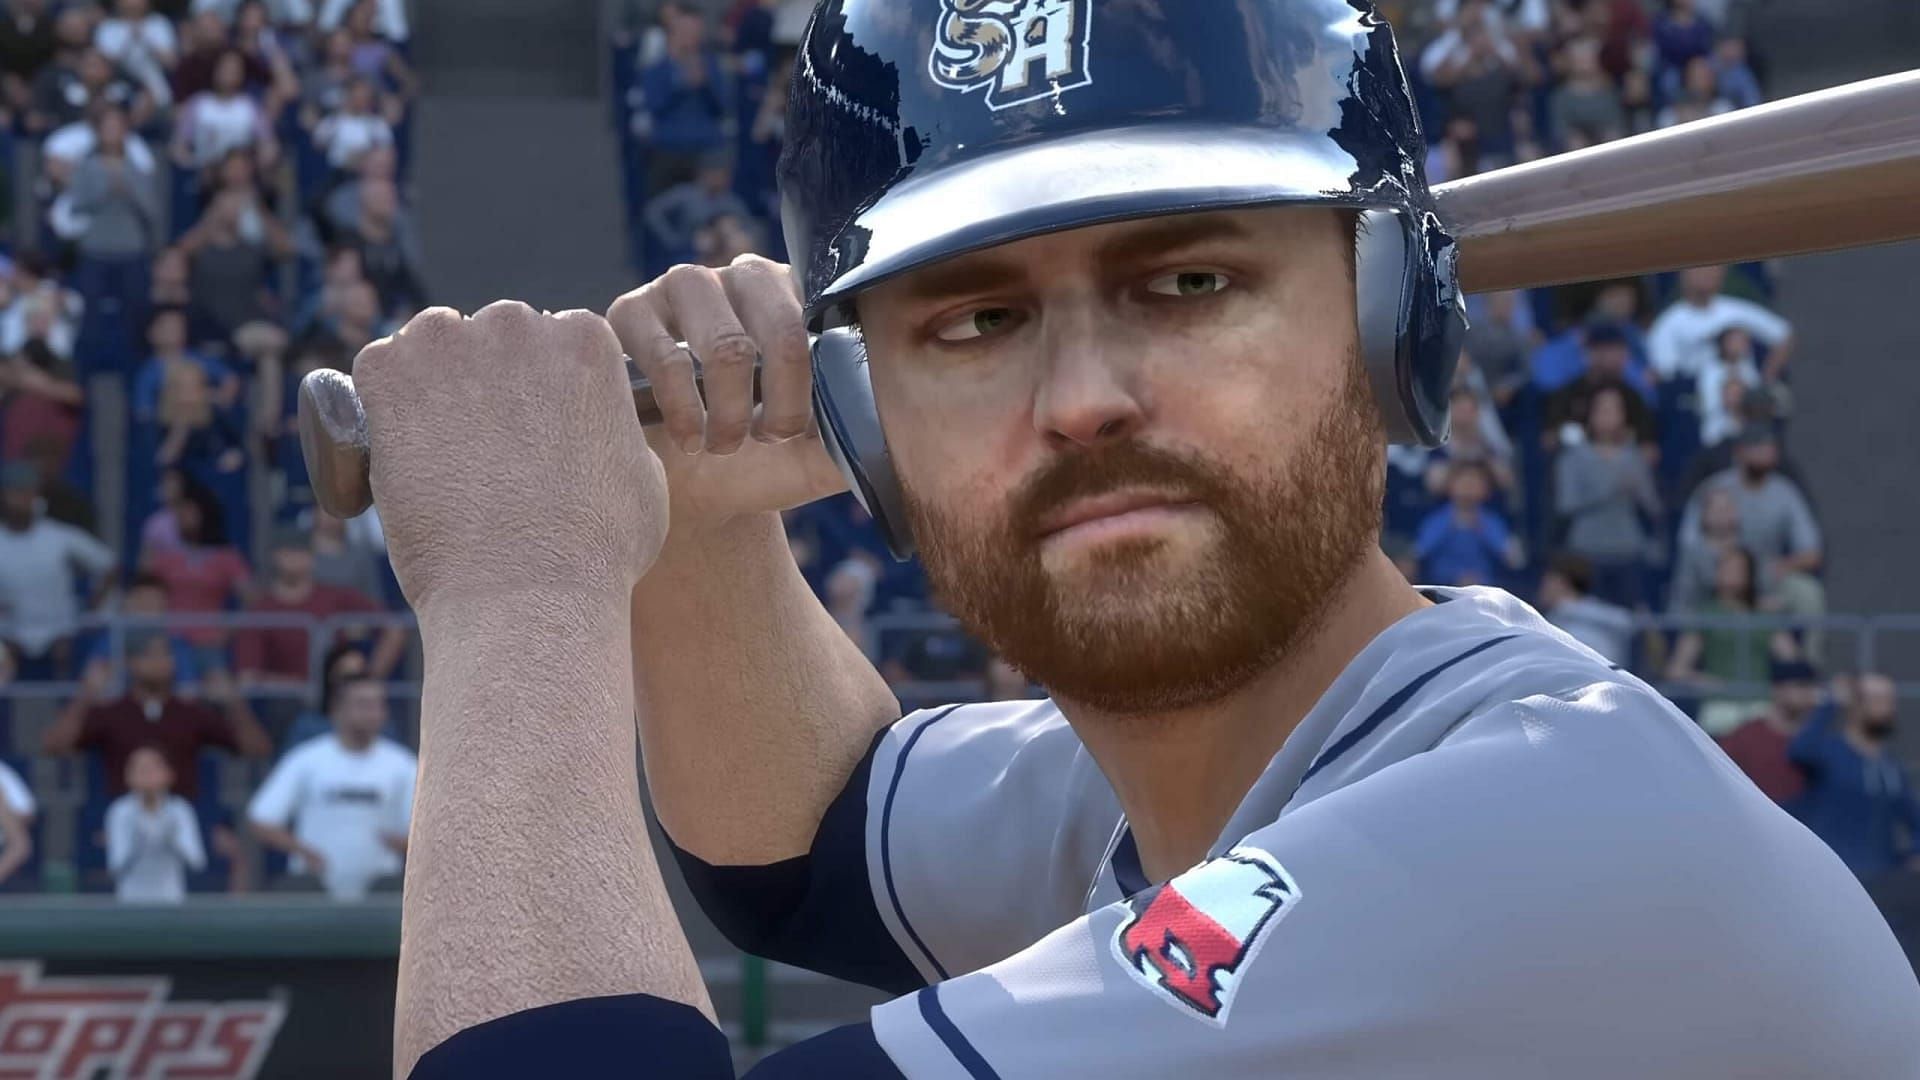 MLB The Show 23&rsquo;s face scan feature is quite intuitive and easy to set up  (Image via PlayStation)